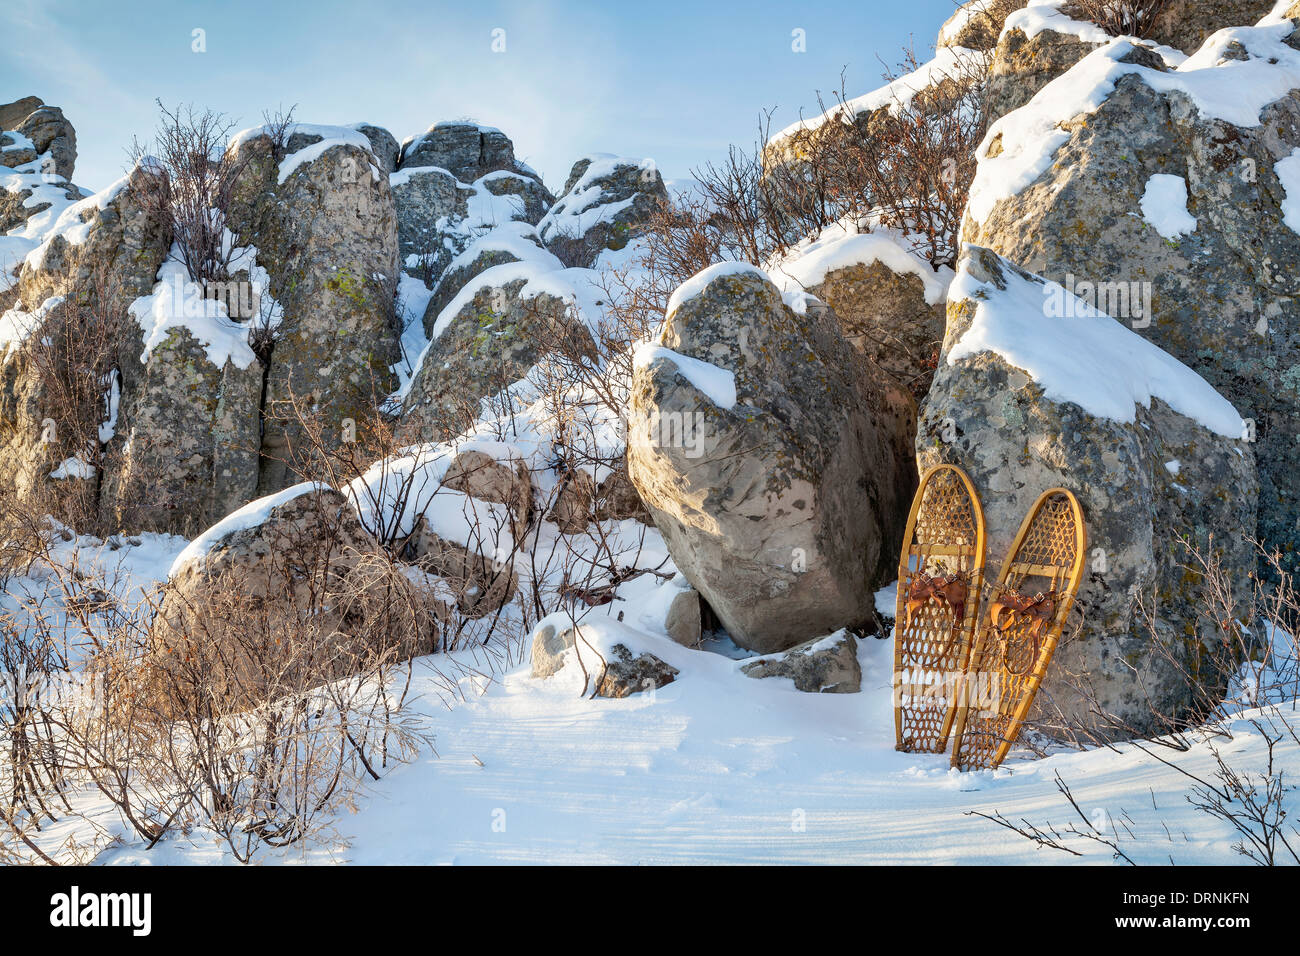 winter landscape with sandstone rocks and classic Bear Paw snowshoes Stock Photo